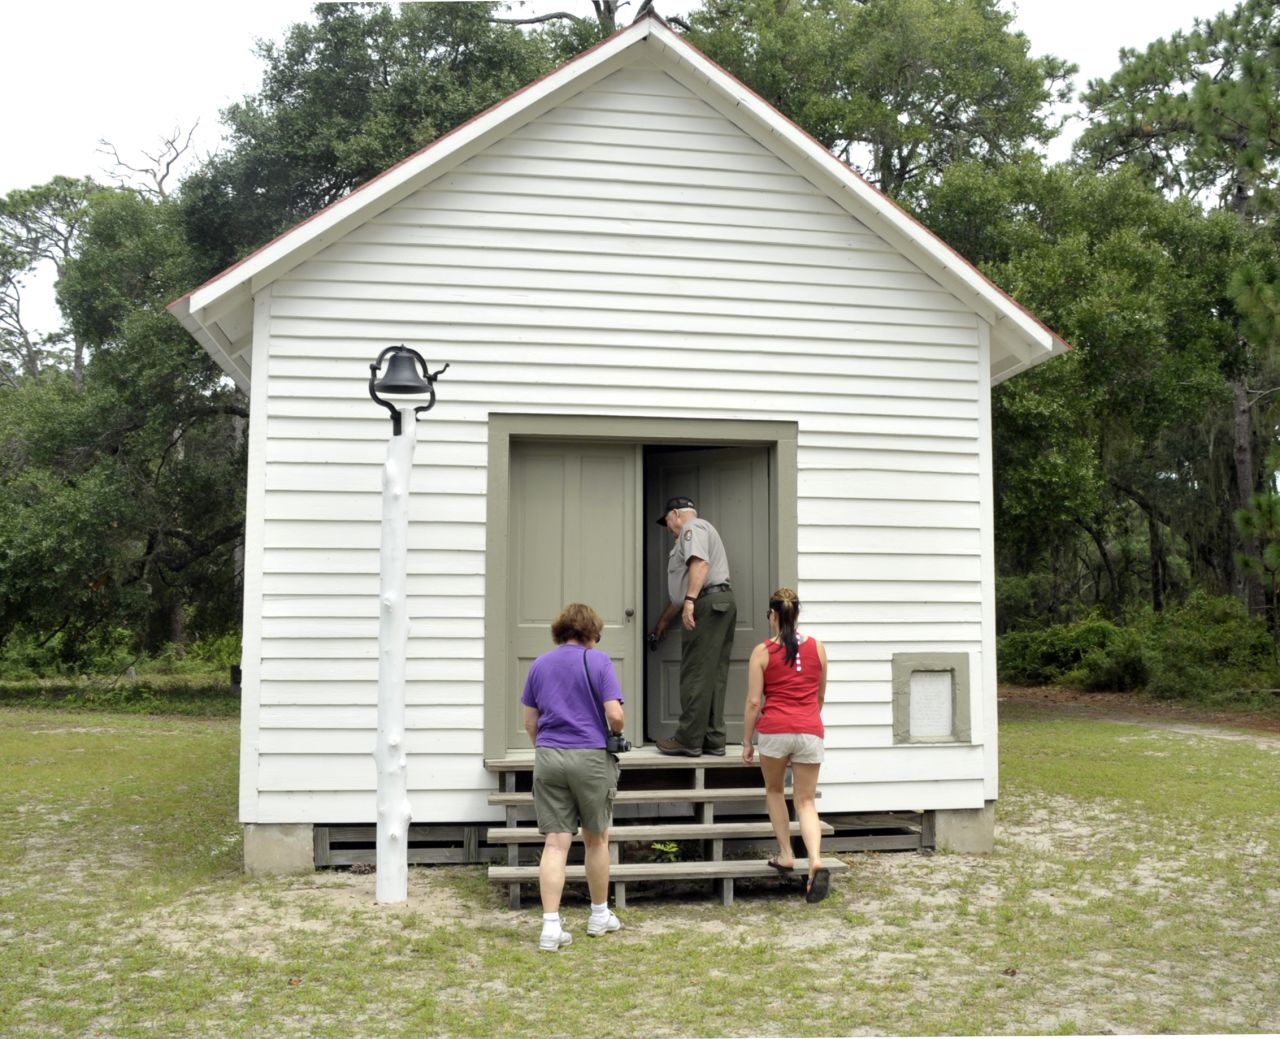 Cumberland Island's First African Baptist Church, which dates back to 1893, hosted the wedding of the late John F. Kennedy Jr. and the late Carolyn Bessette. 